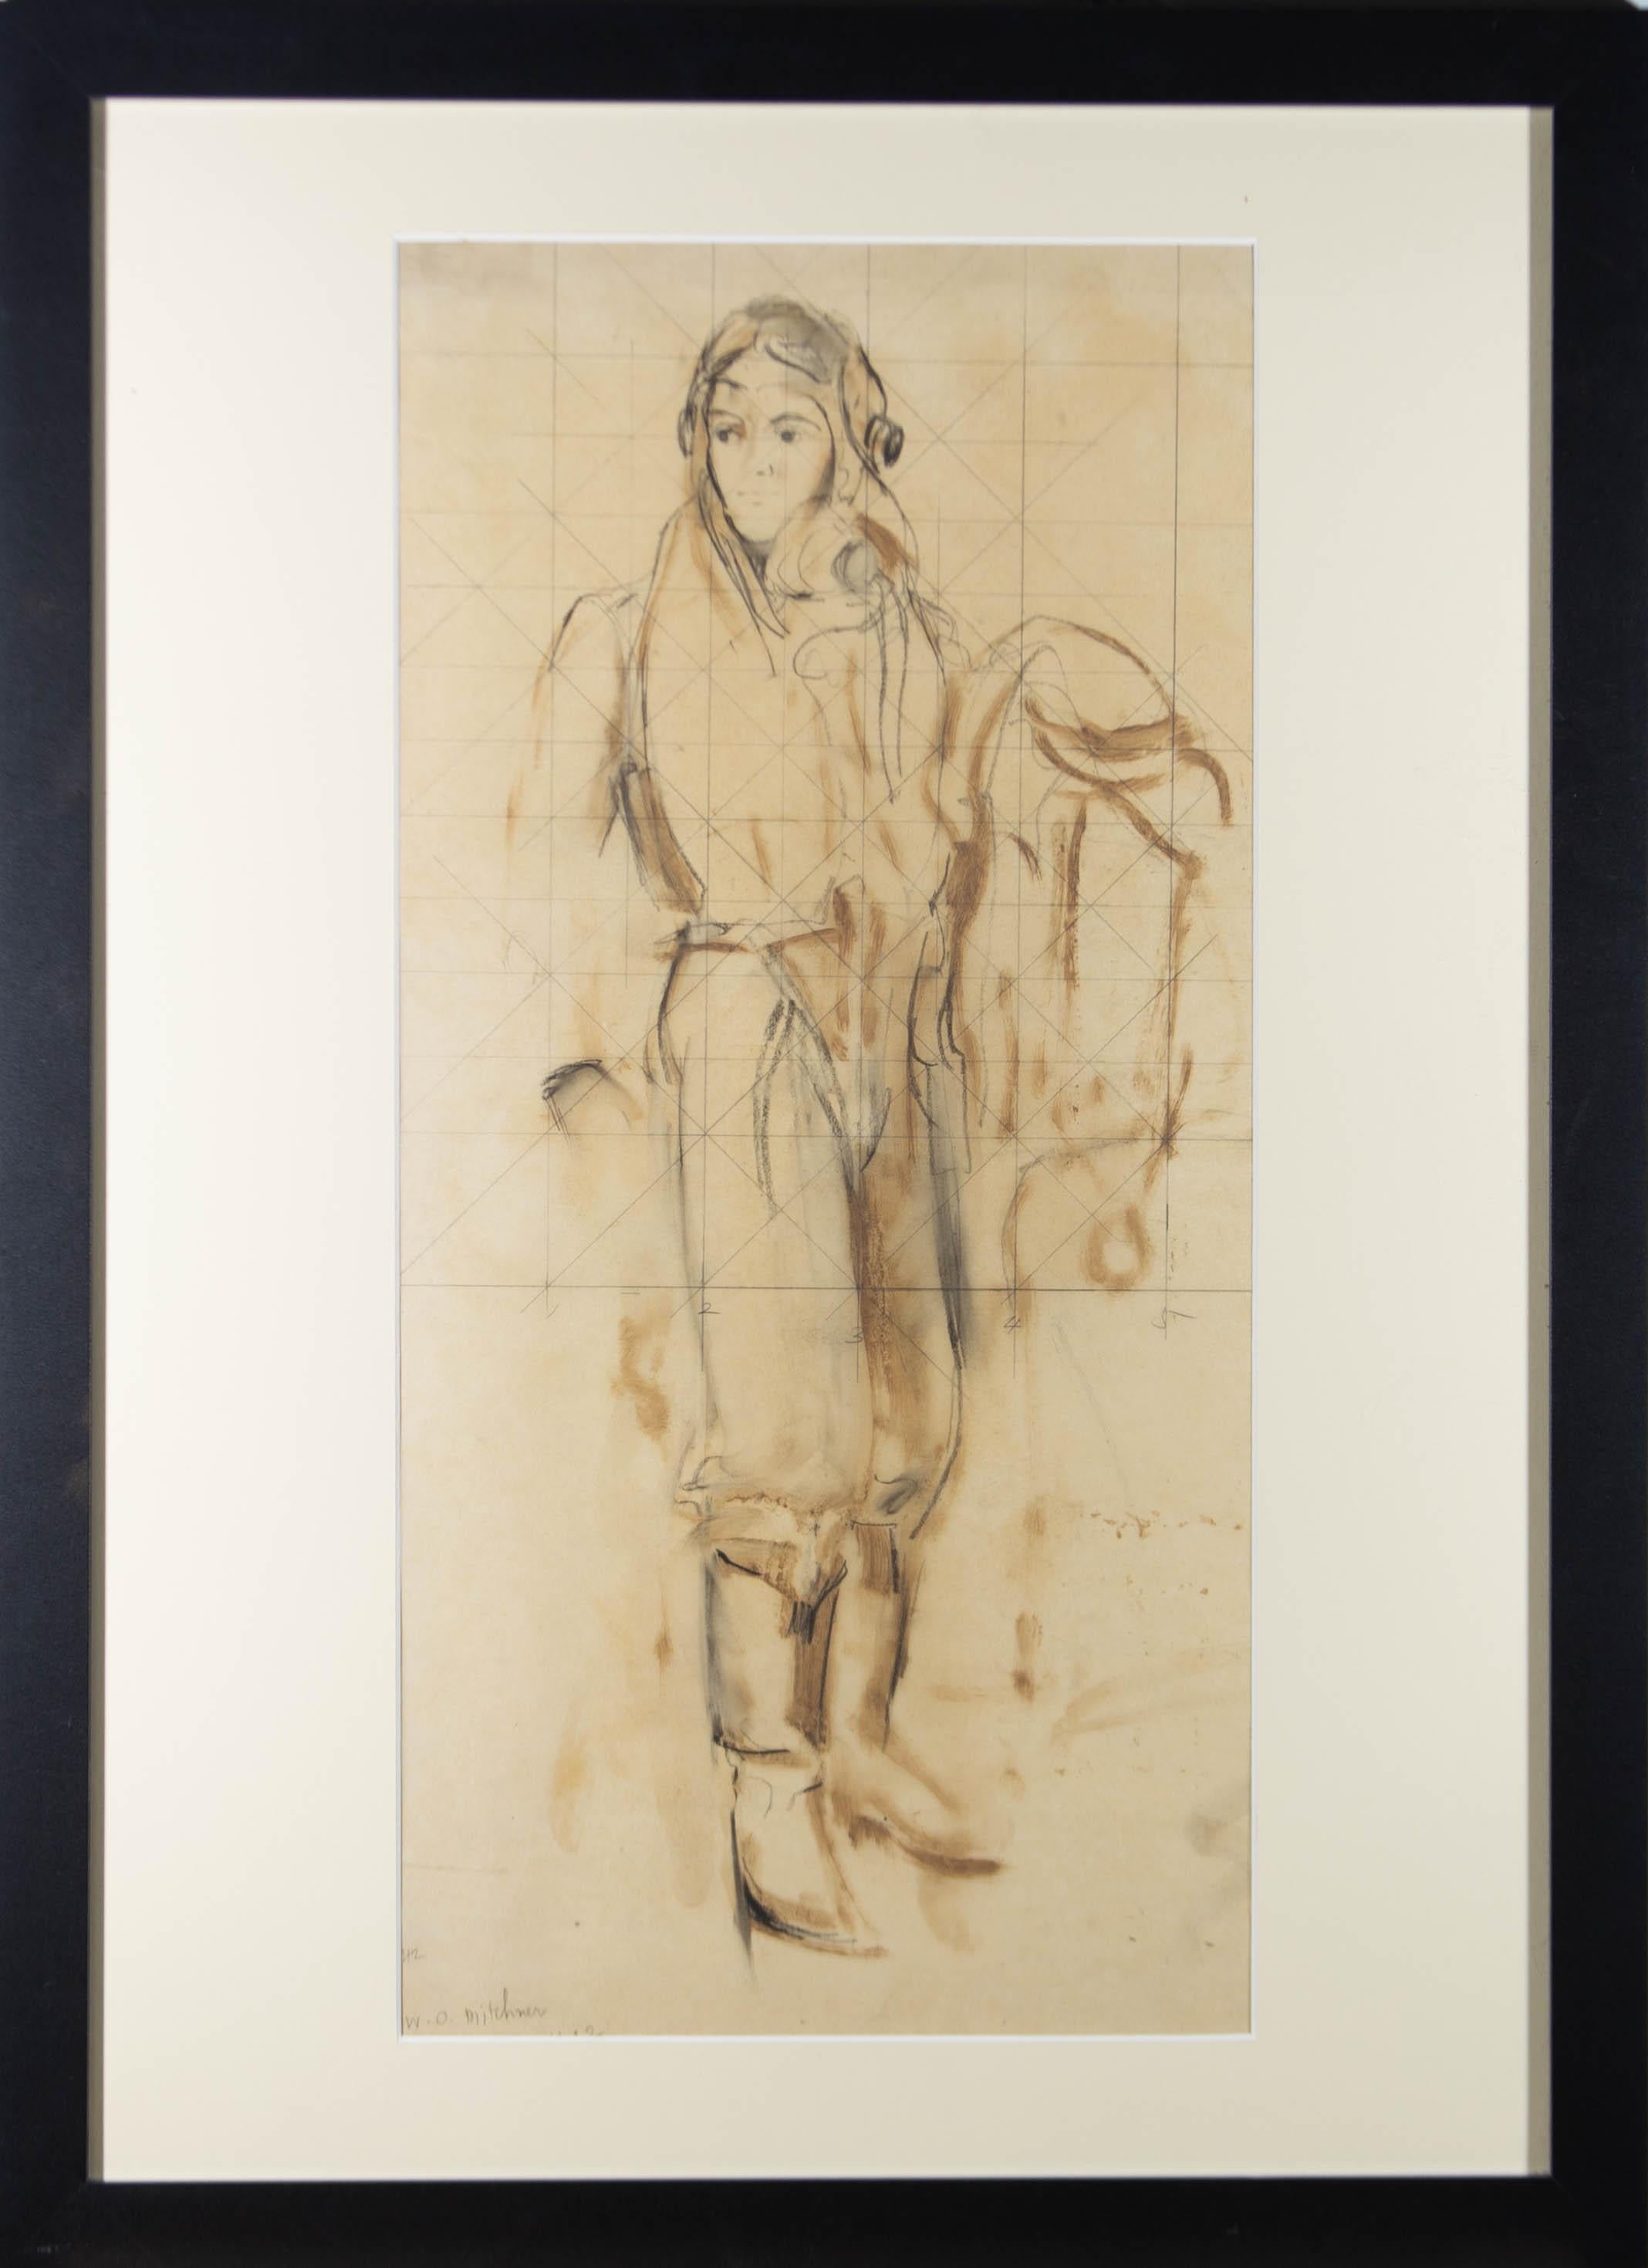 A fine graphite study depicting a World War Two pilot dressed in his flying attire. The artwork is inscribed in the bottom left-hand corner, and well presented in a contemporary black frame with a cream mount. On wove.